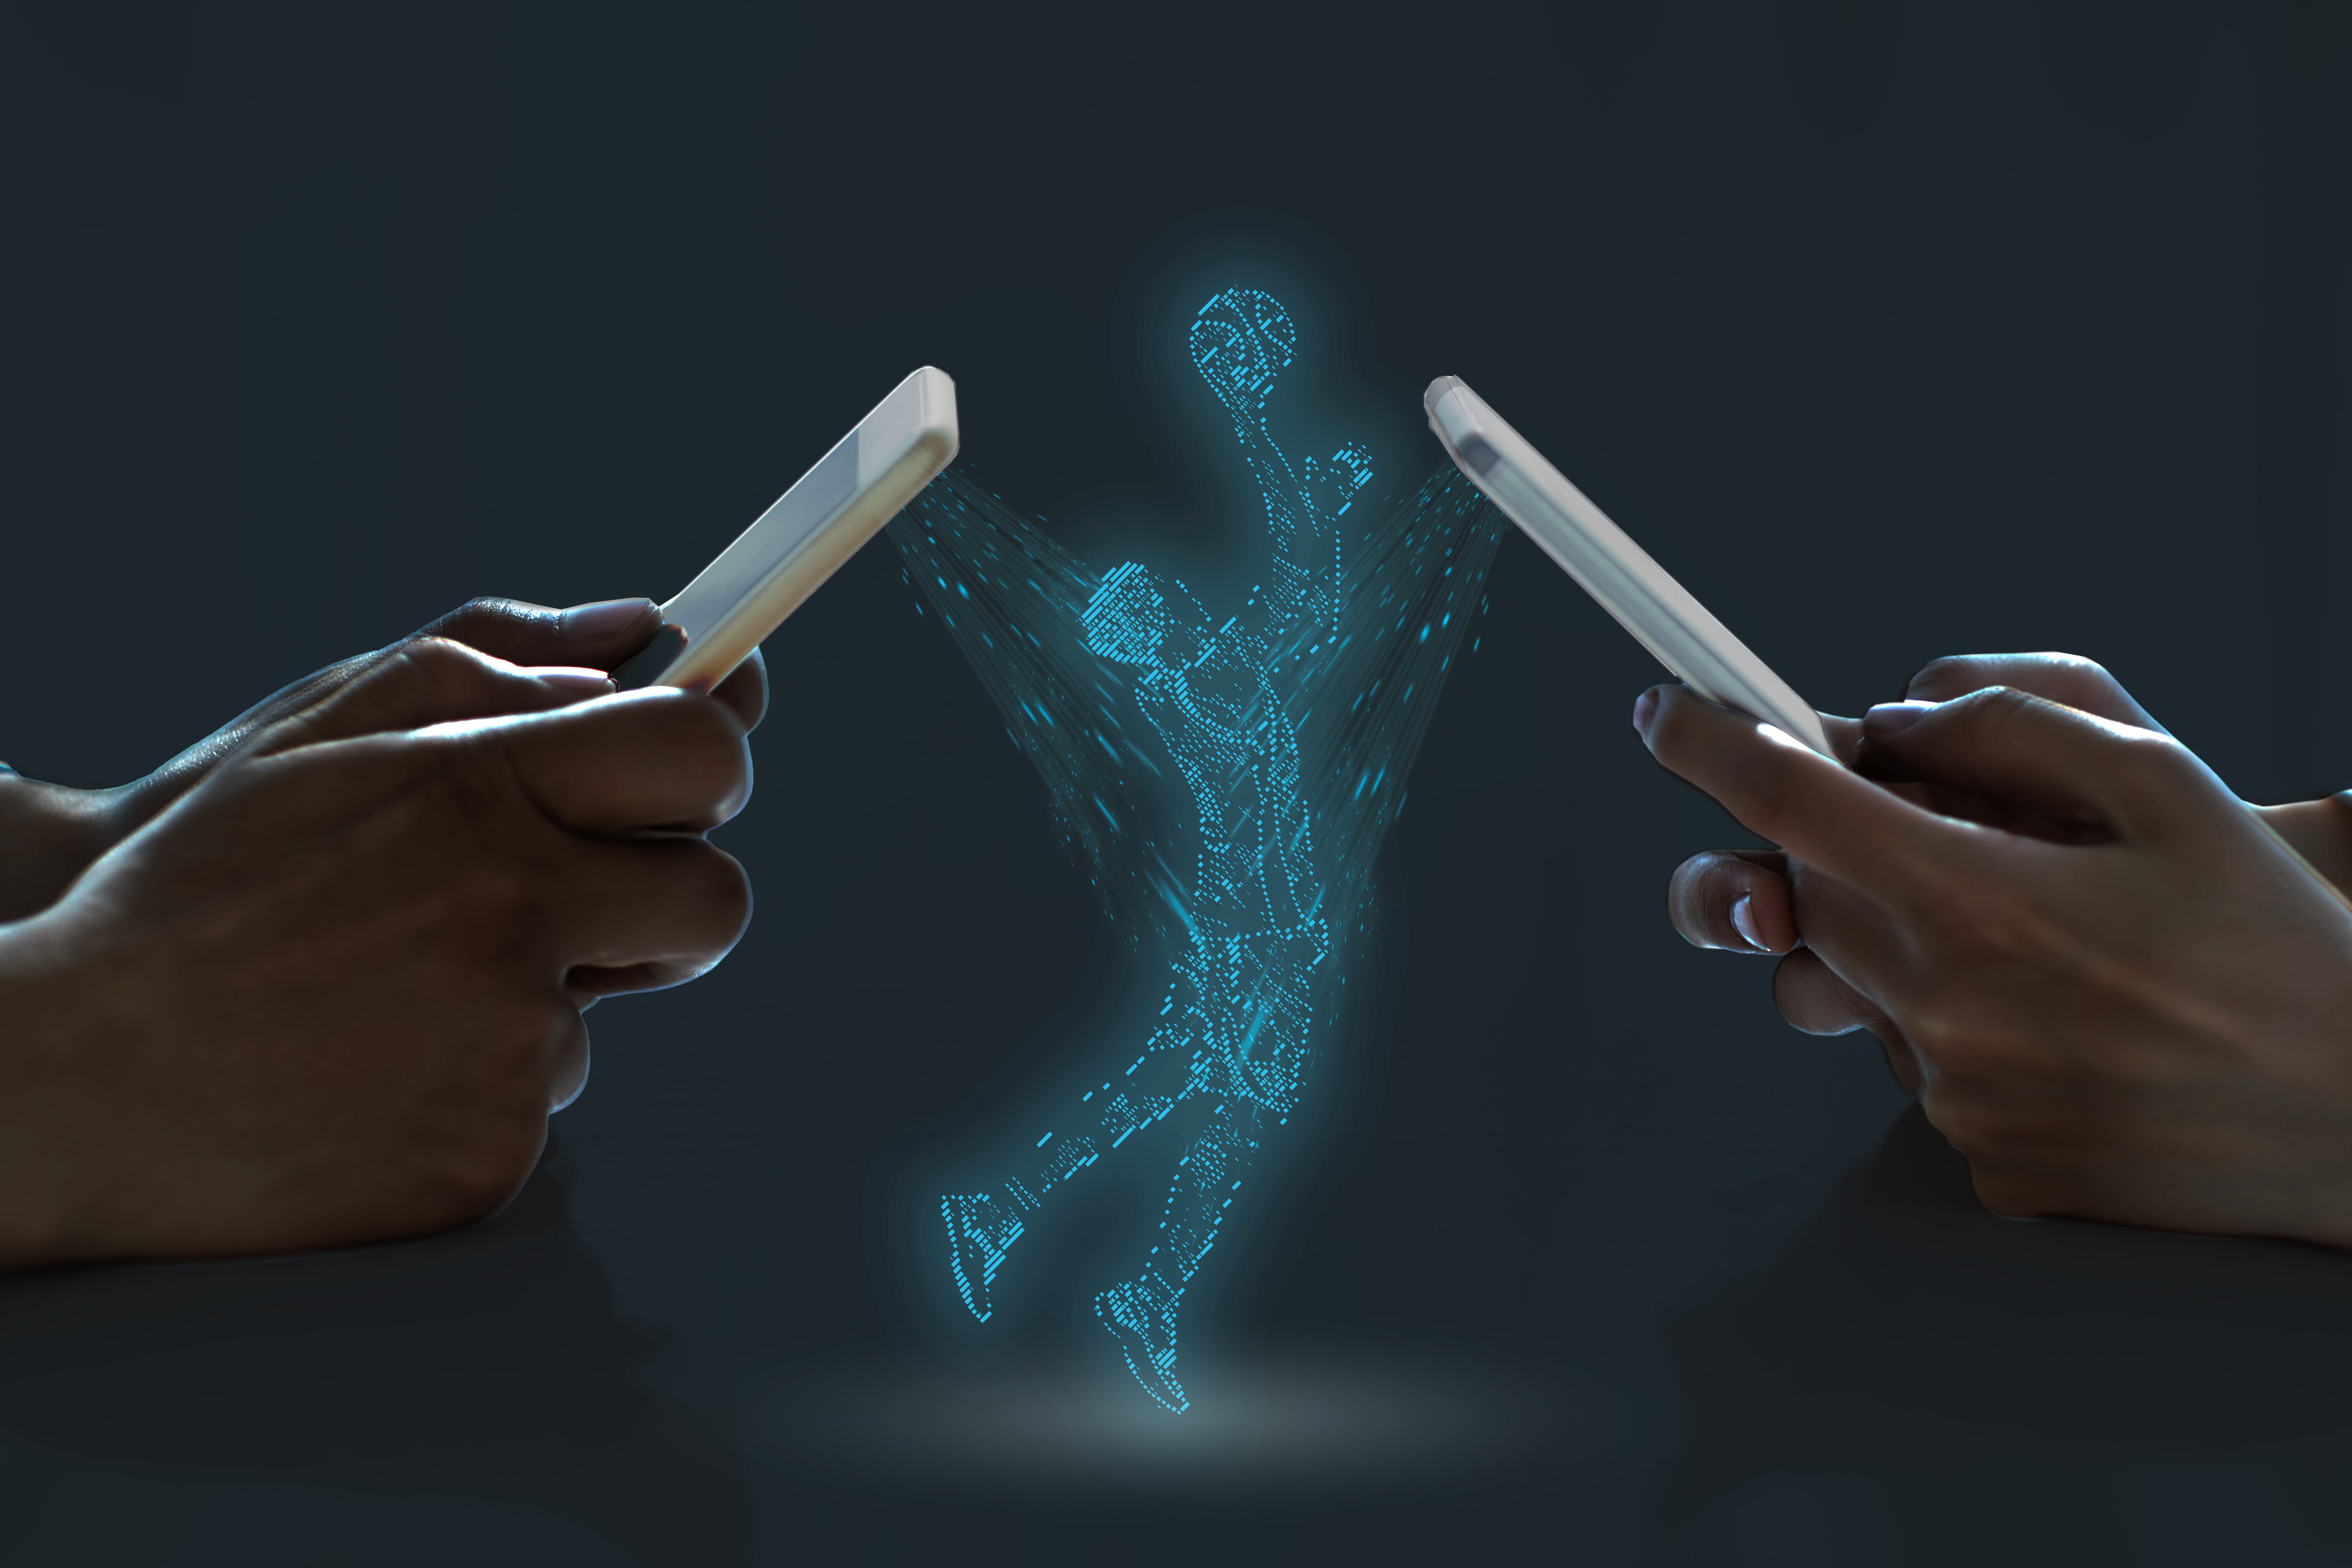 Two phones connecting together to create a hologram image of an athlete